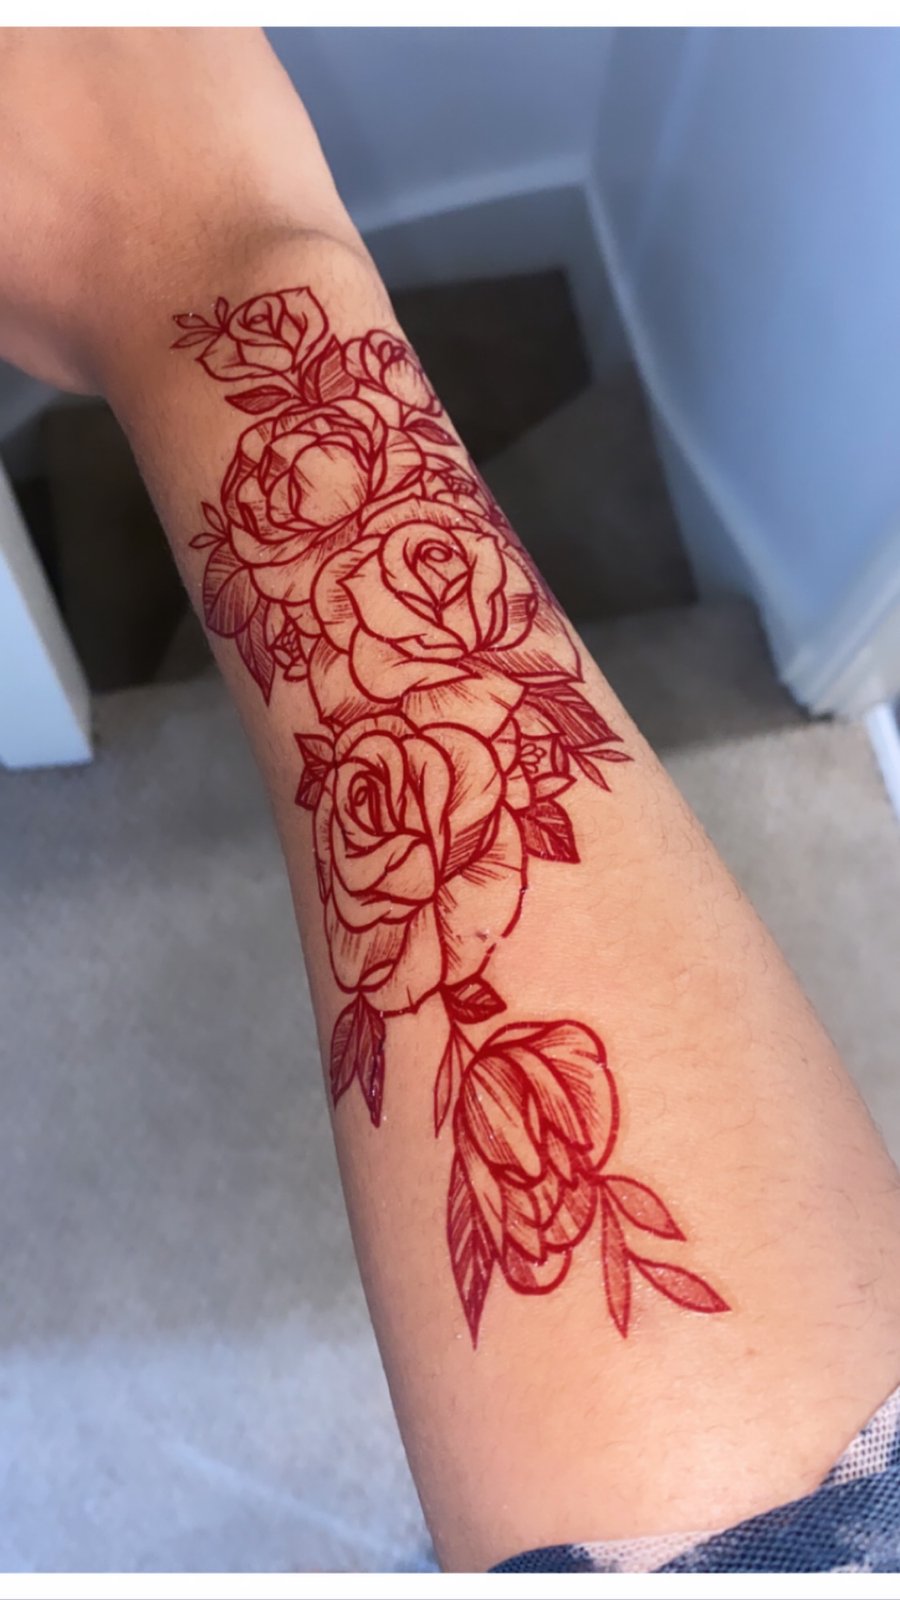 XL floral sleeve tattoo - Available in black or red